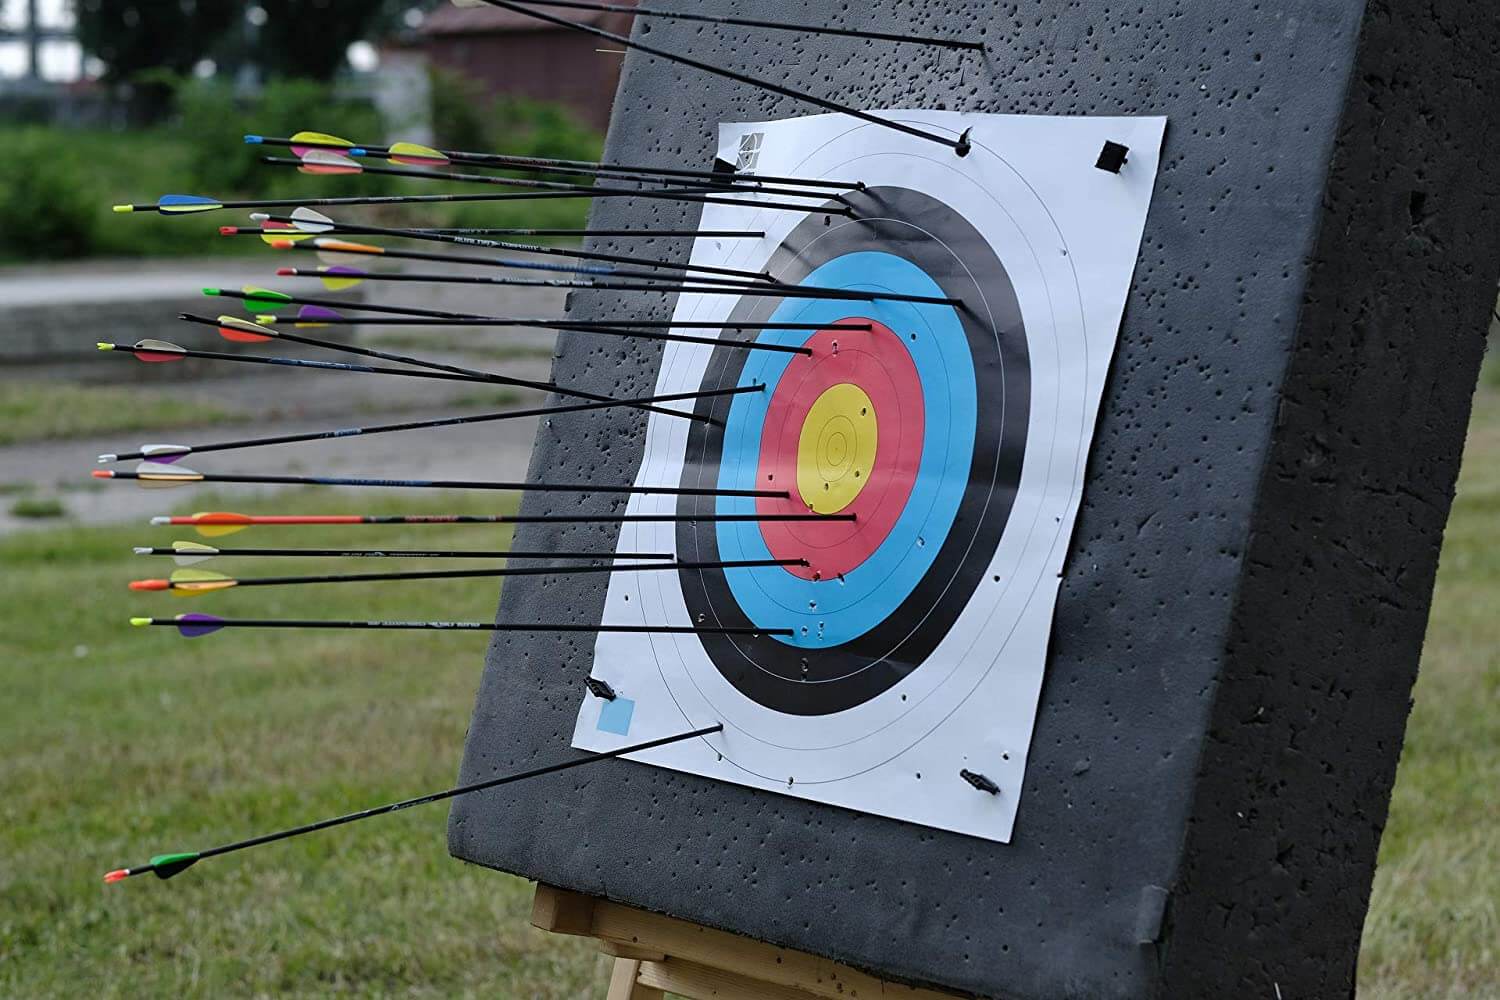 2x2 Ft. Economy Bow Target, Includes 2 Paper Targets and Push Pins